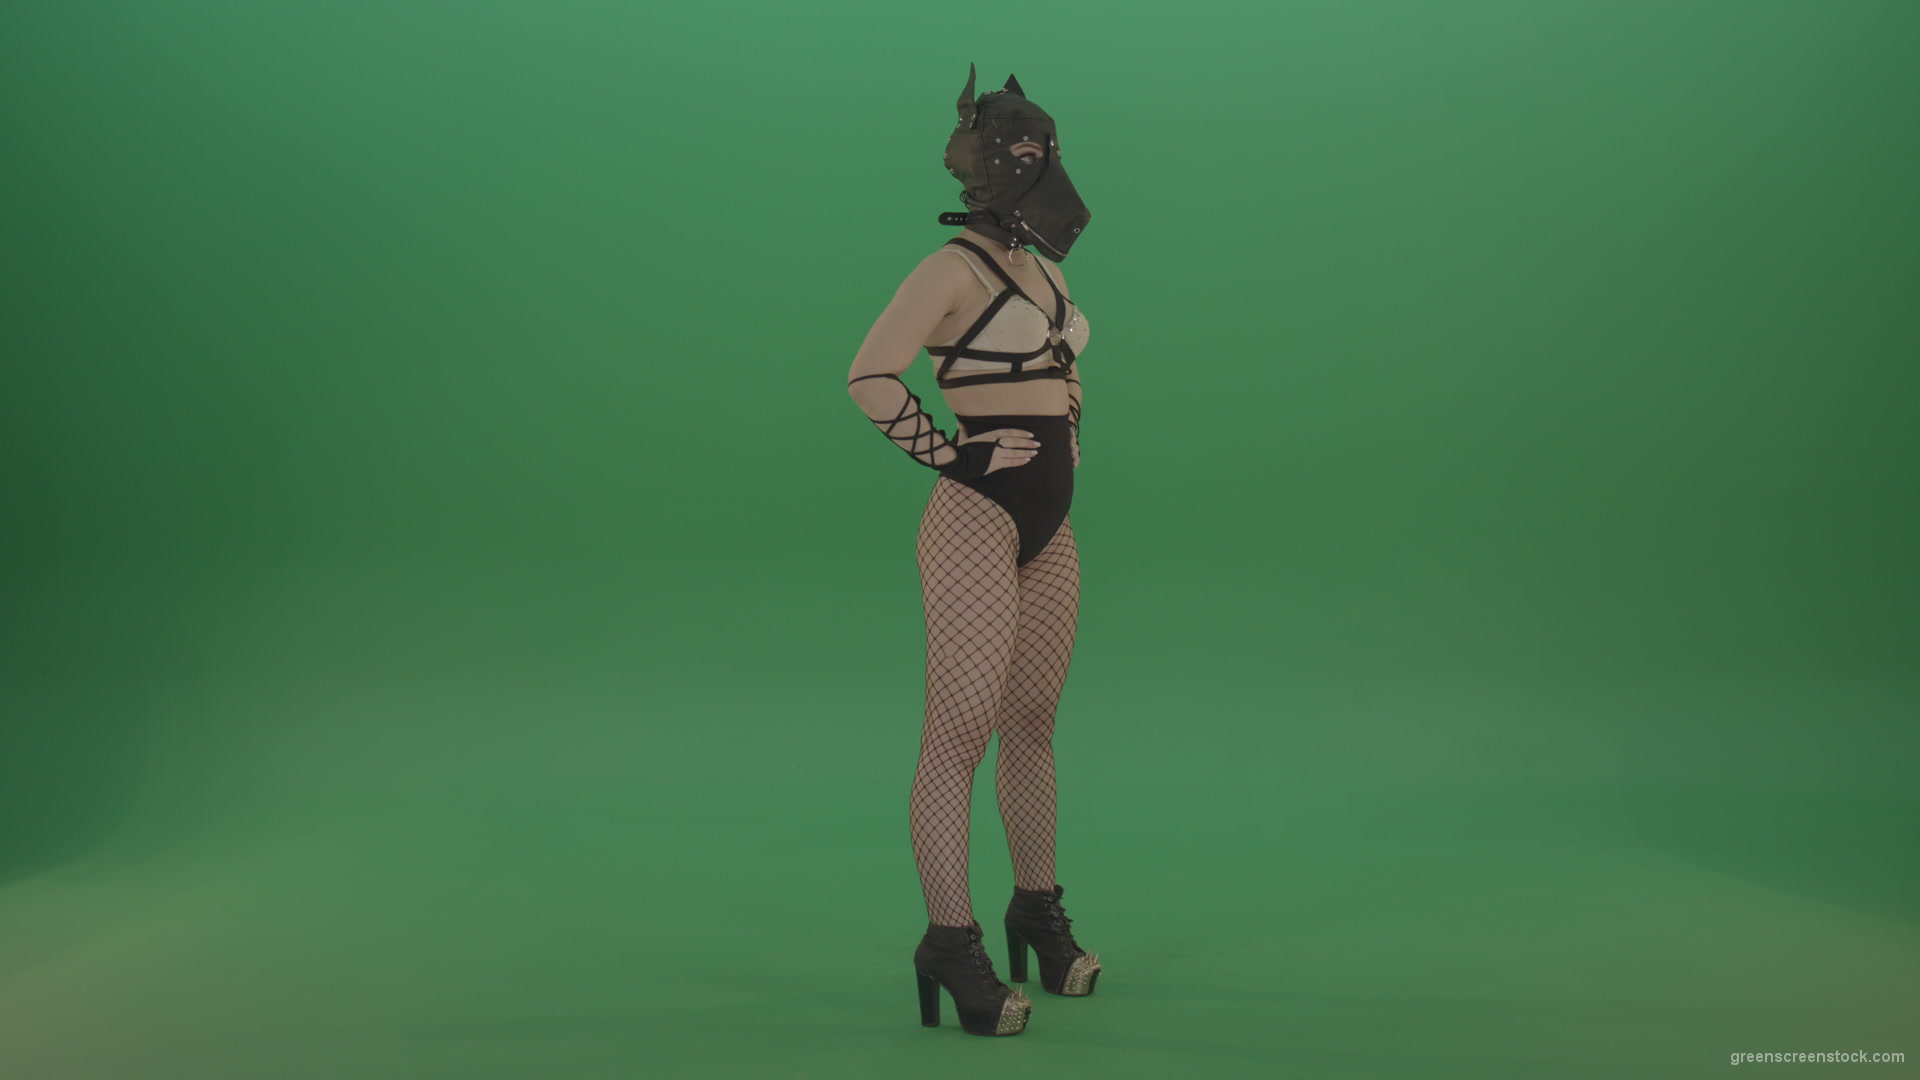 EDM-Girl-in-Wolf-Mask-making-fight-beats-on-green-screen_001 Green Screen Stock